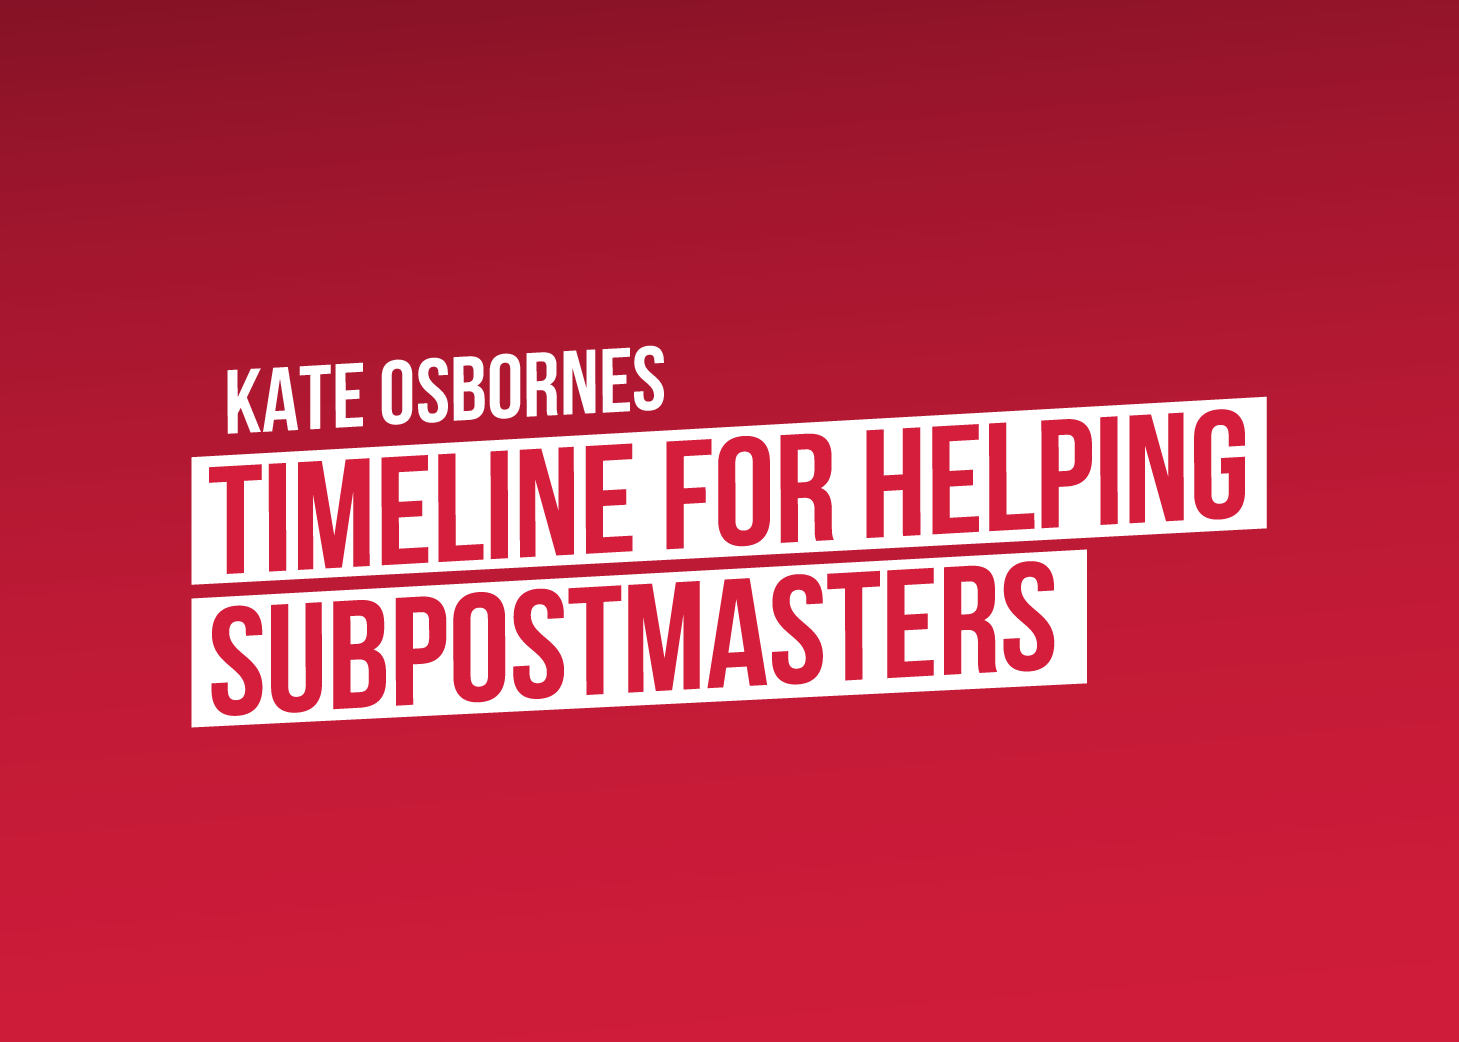 Timeline for helping Subpostmasters